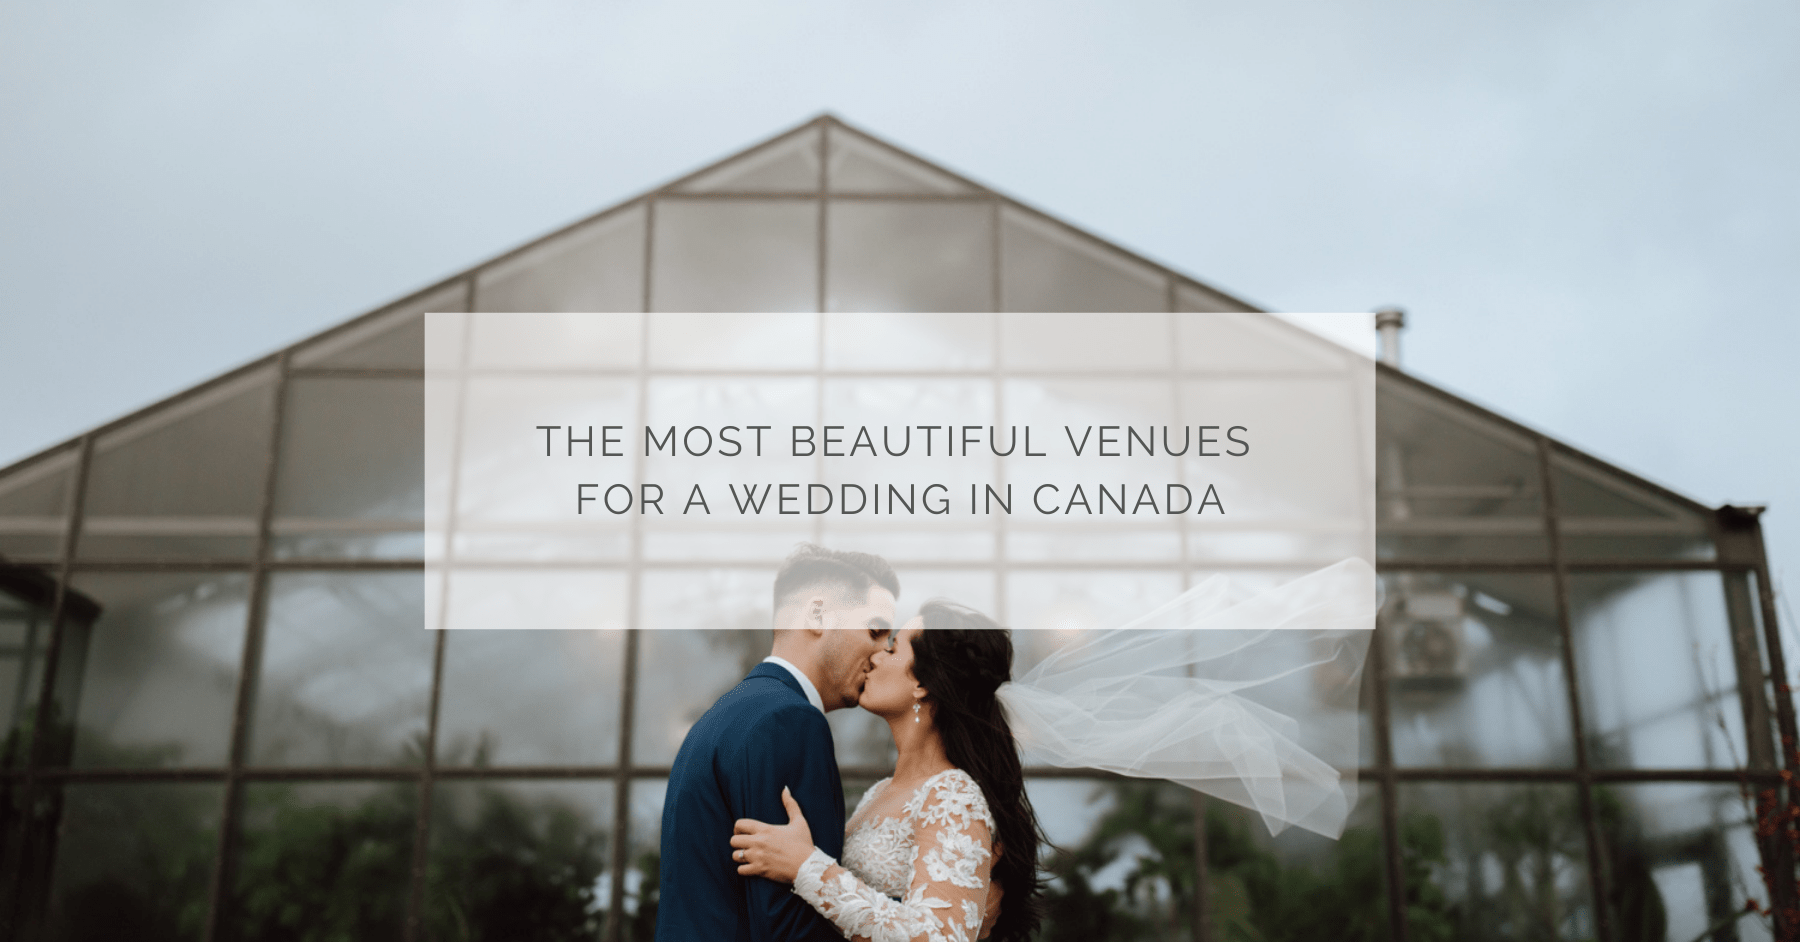 The most beautiful venues for a wedding in Canada